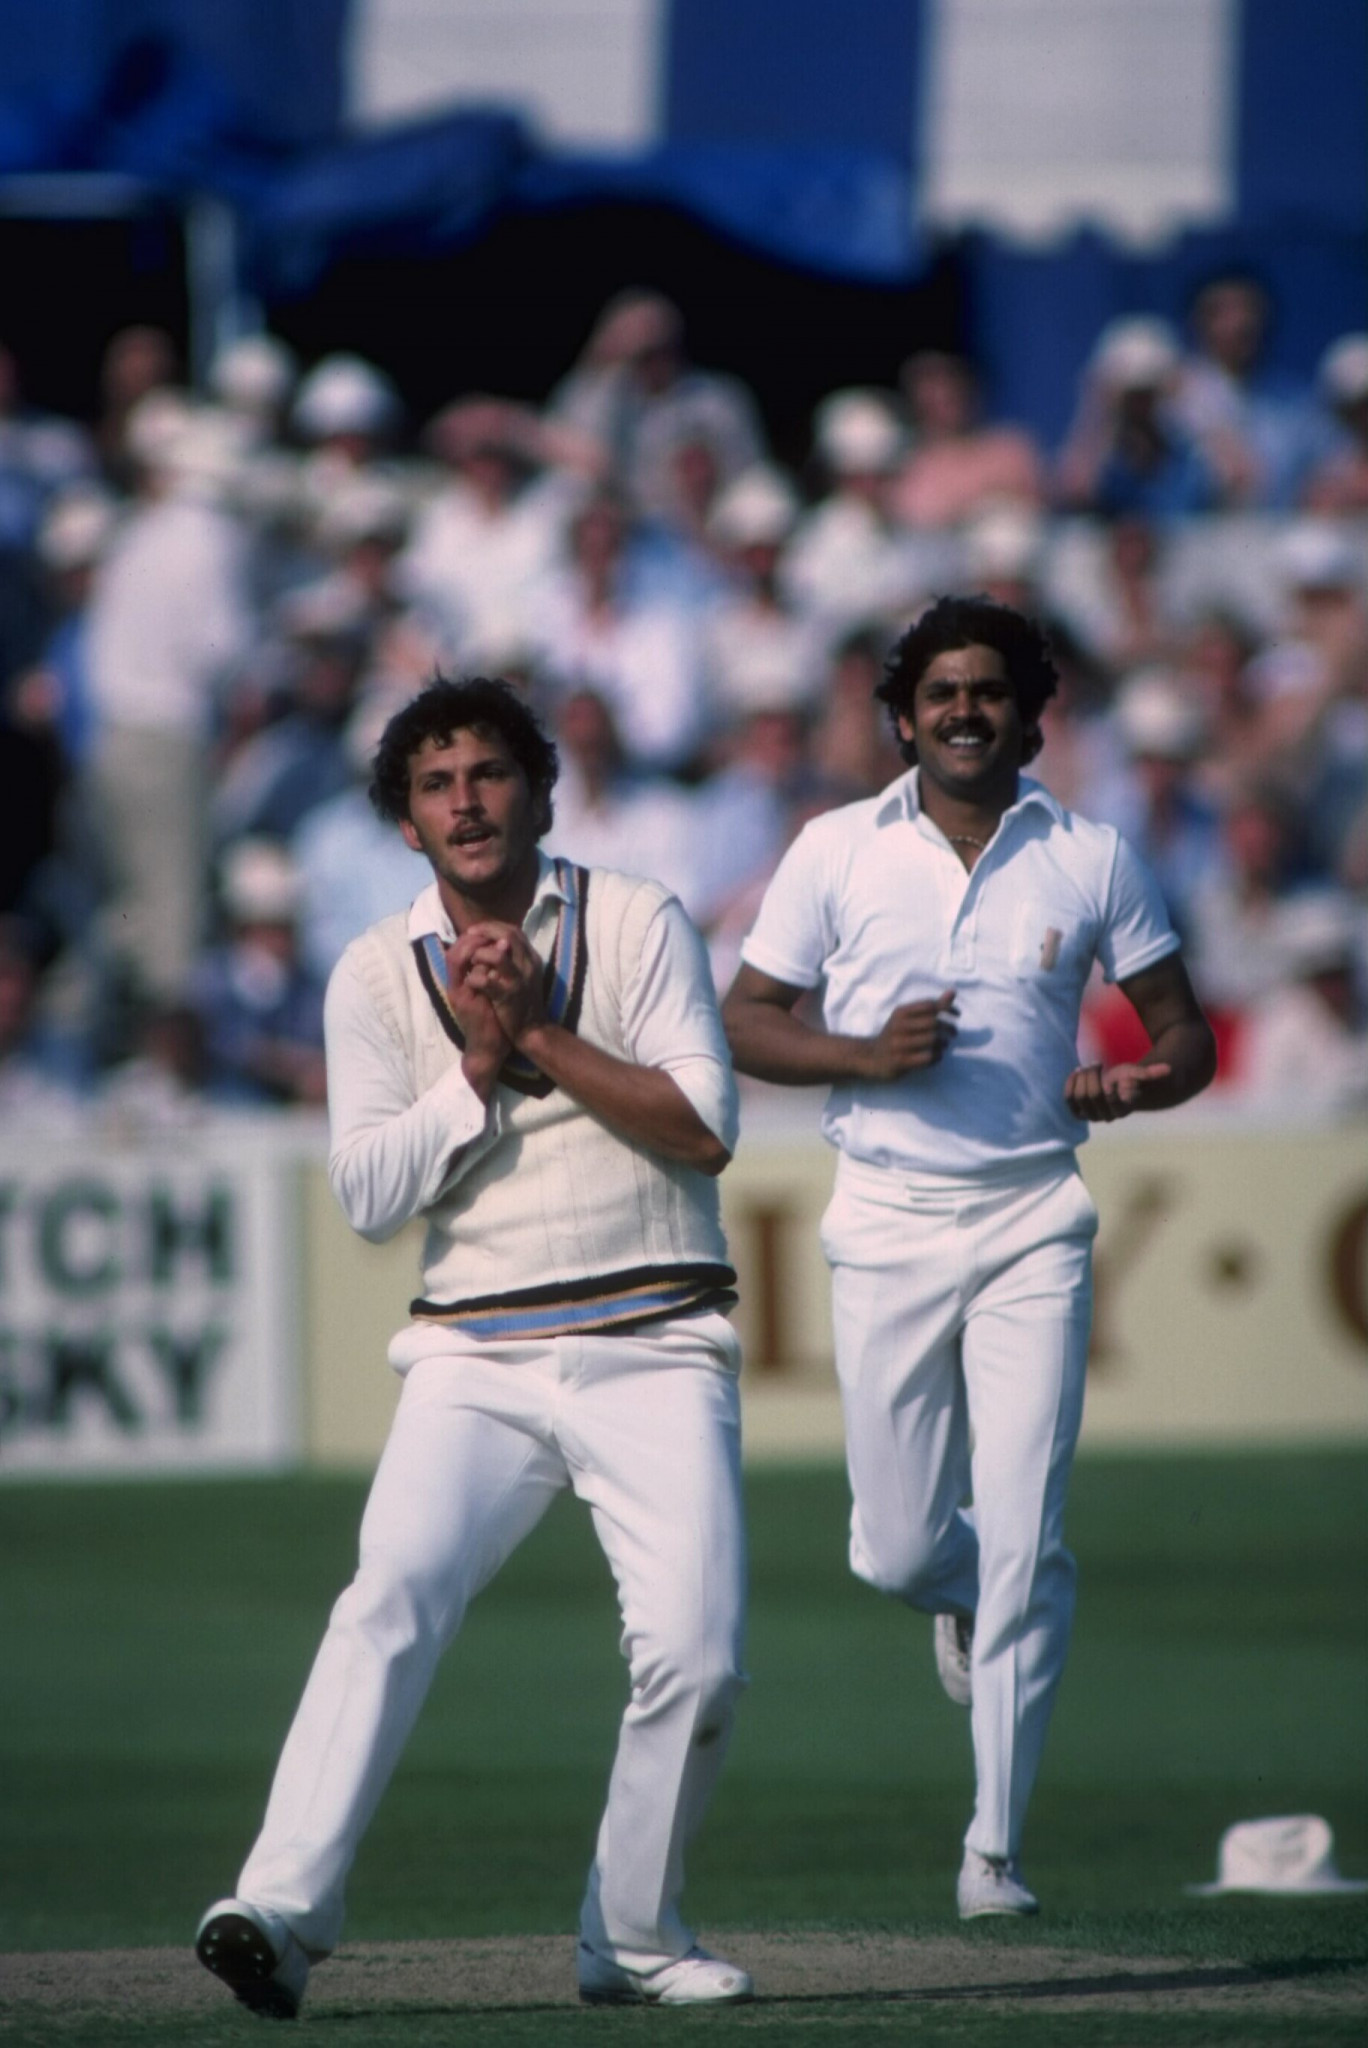 BCCI Presidential candidate Roger Binny completes a catch for India during the 1983 Prudential World Cup ©Getty Images